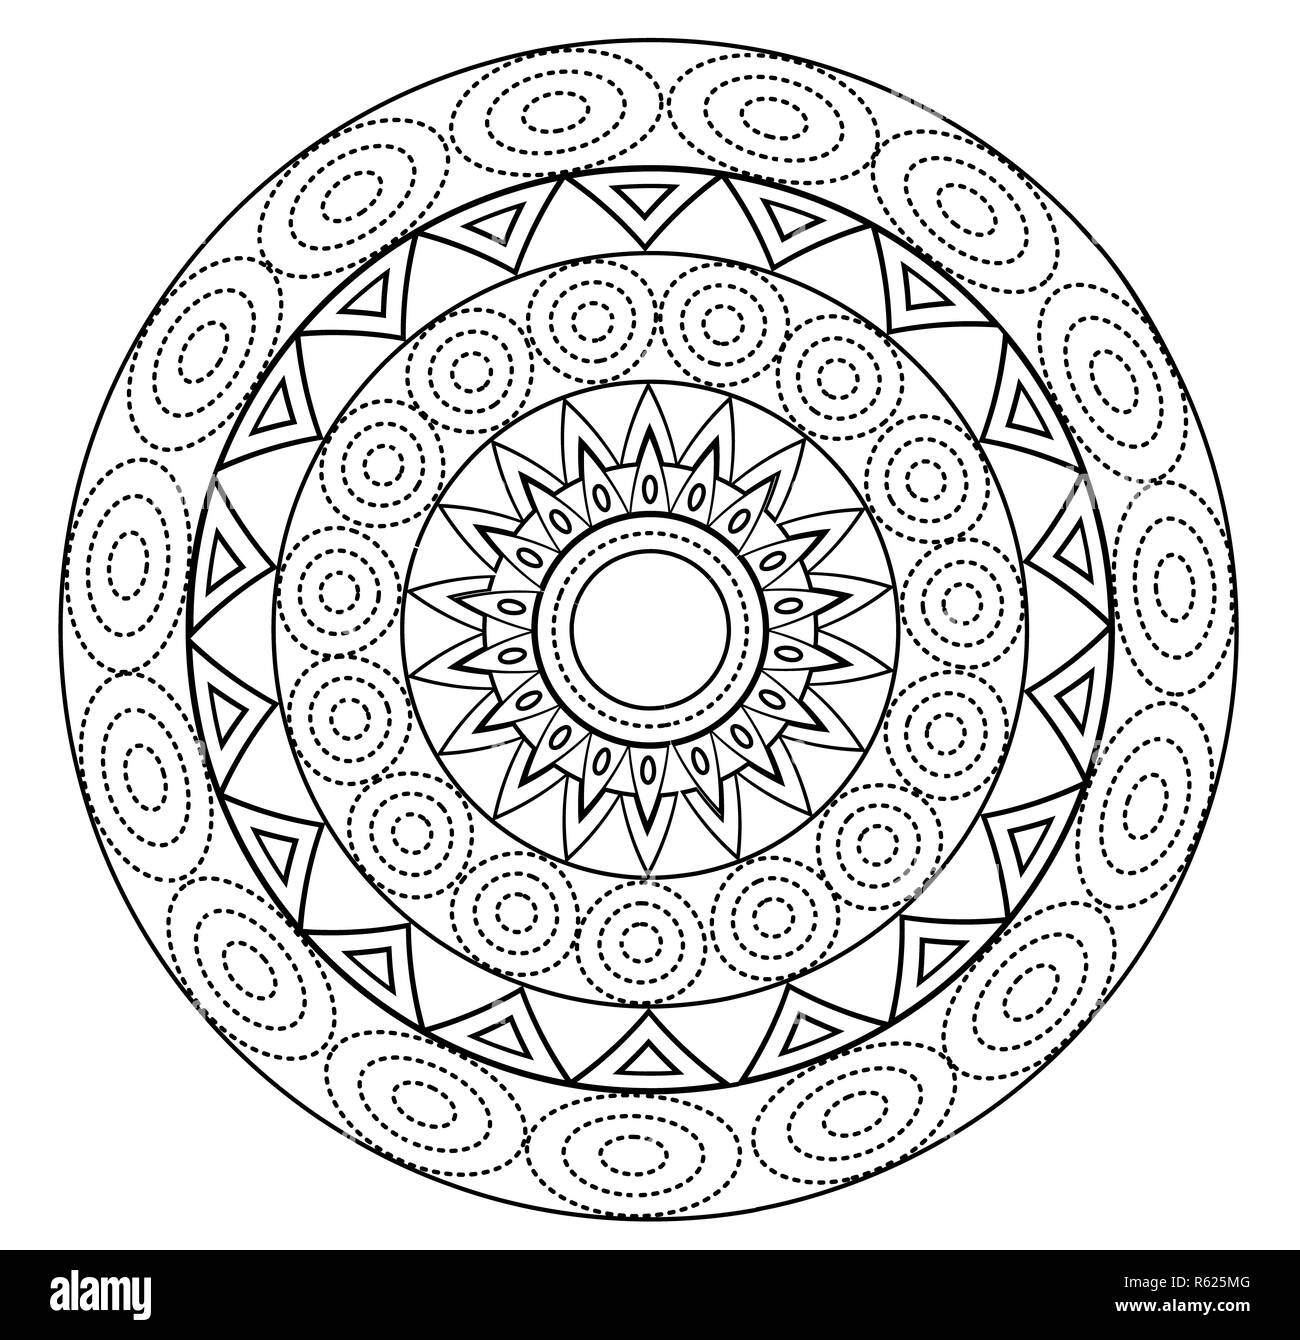 Mandalas for coloring book. Decorative black and white round